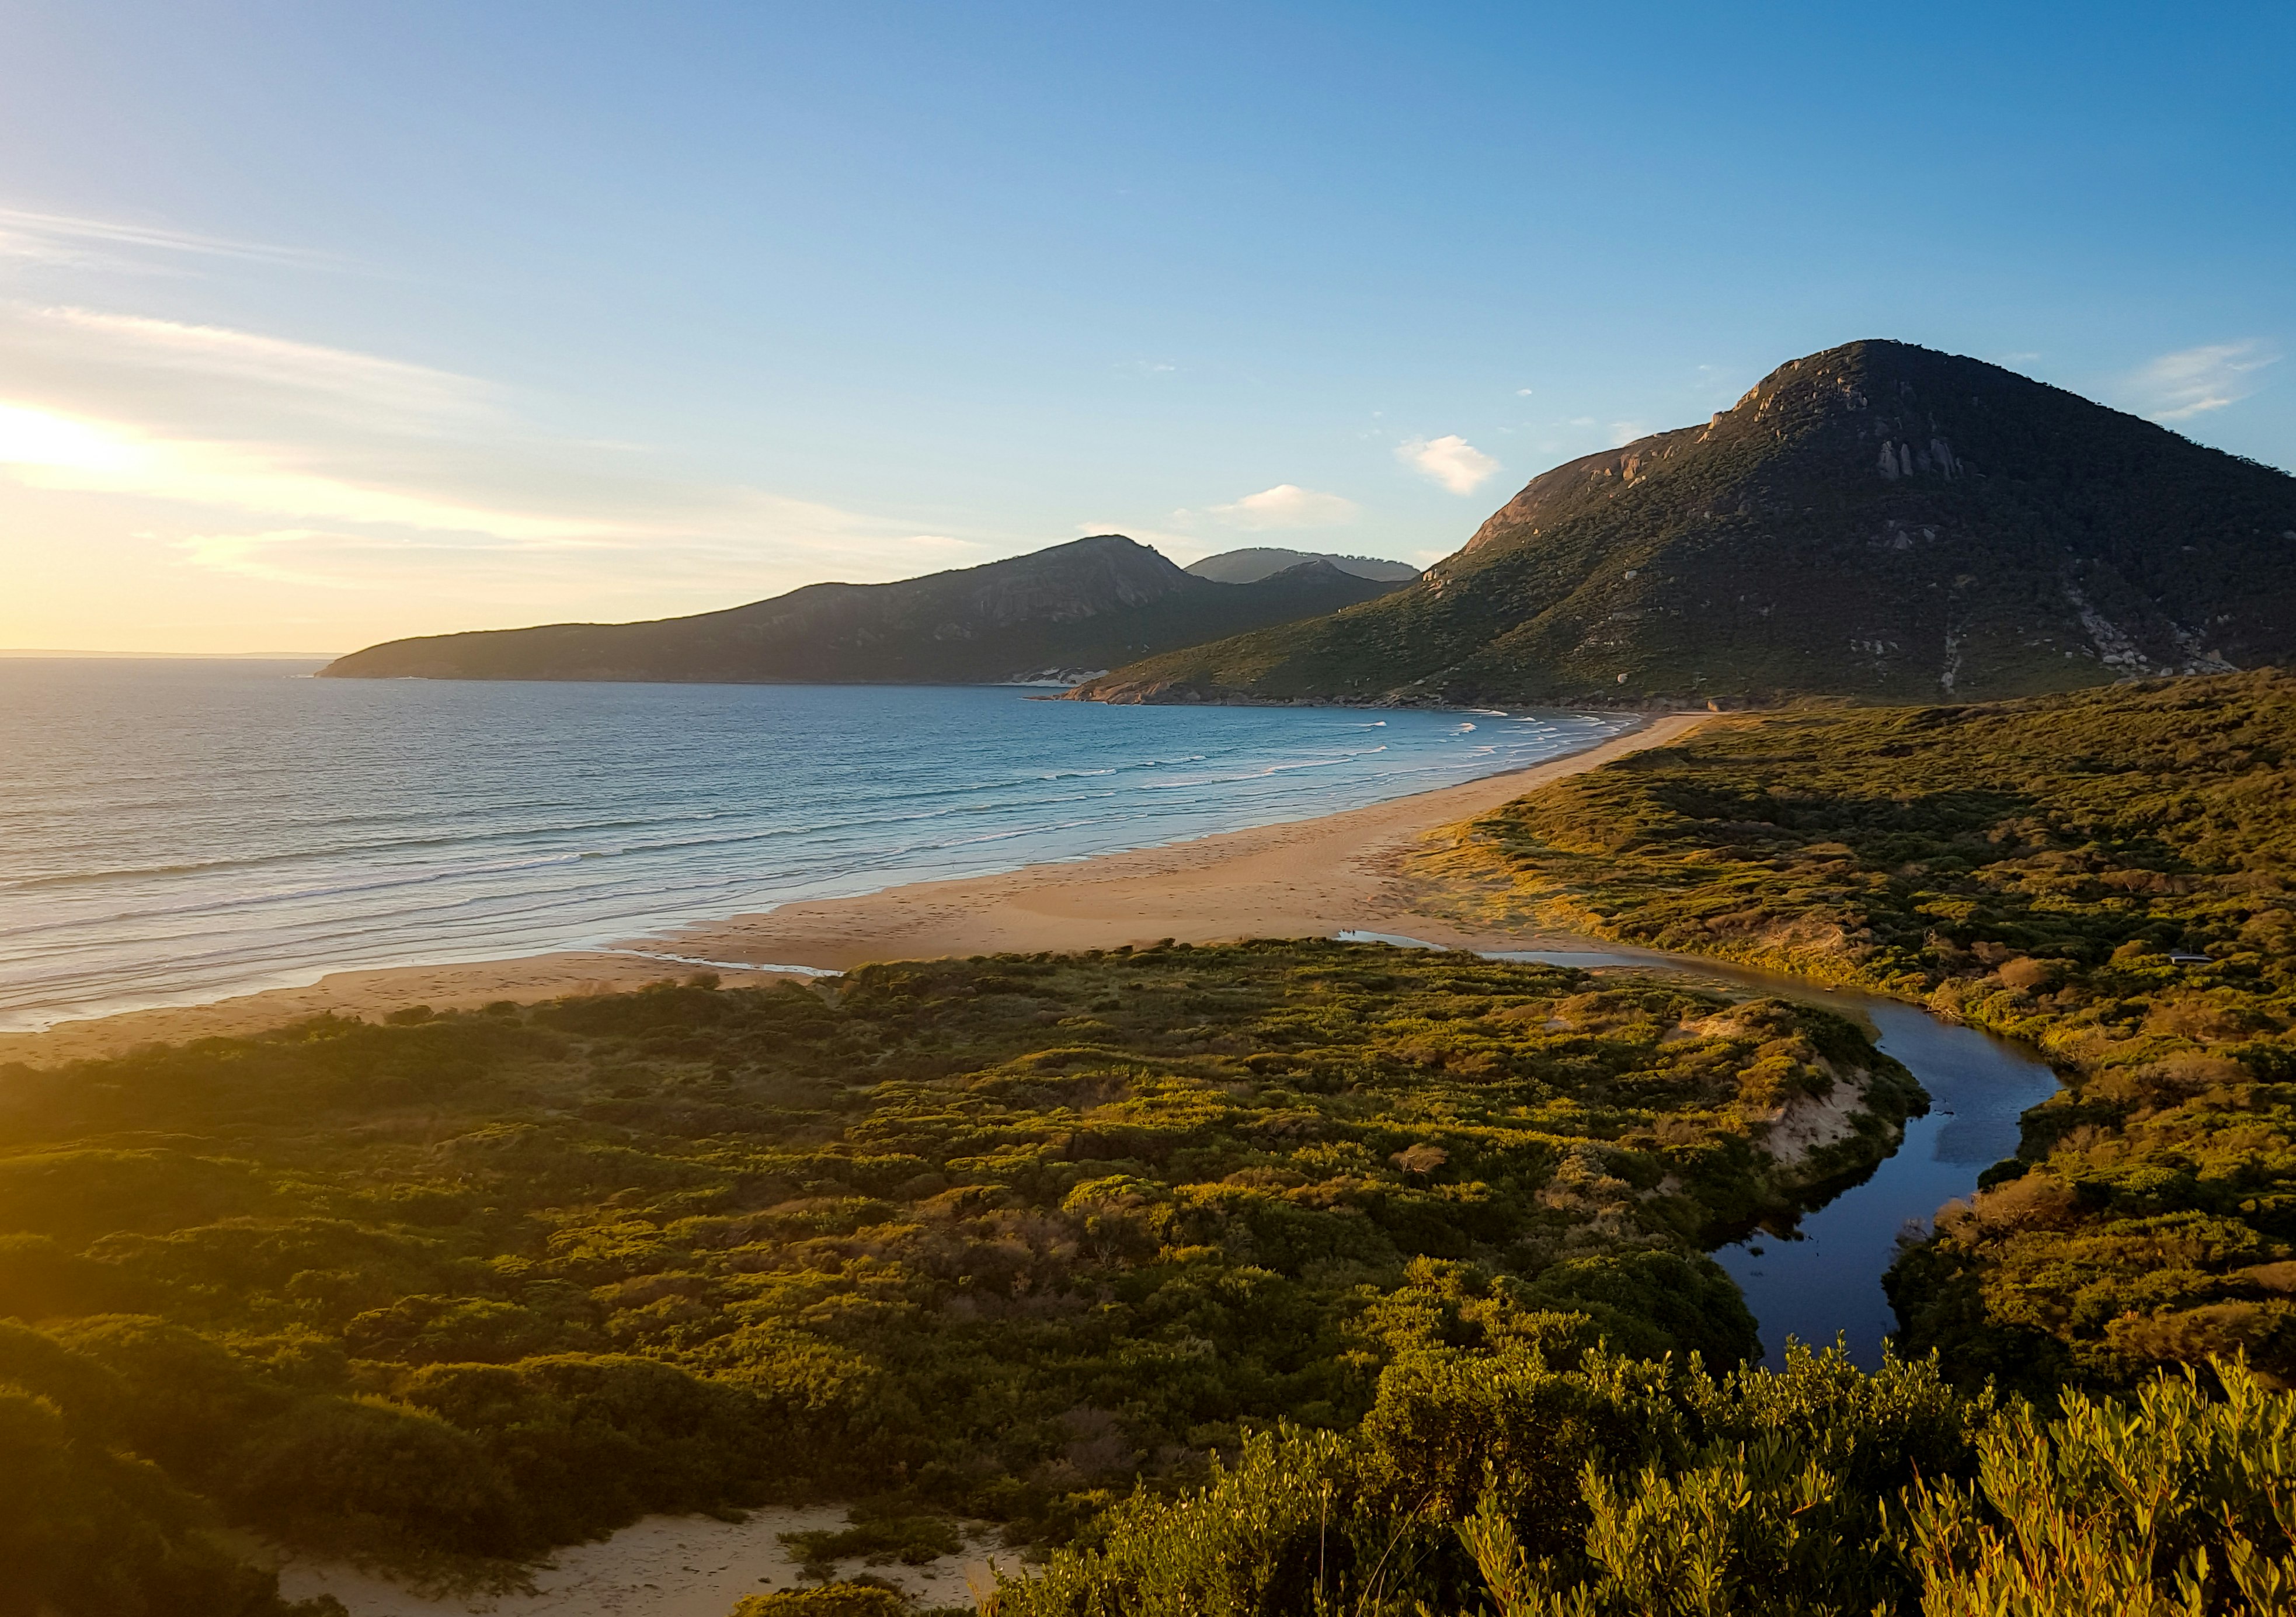 View from the campsite in Wilsons Promontory